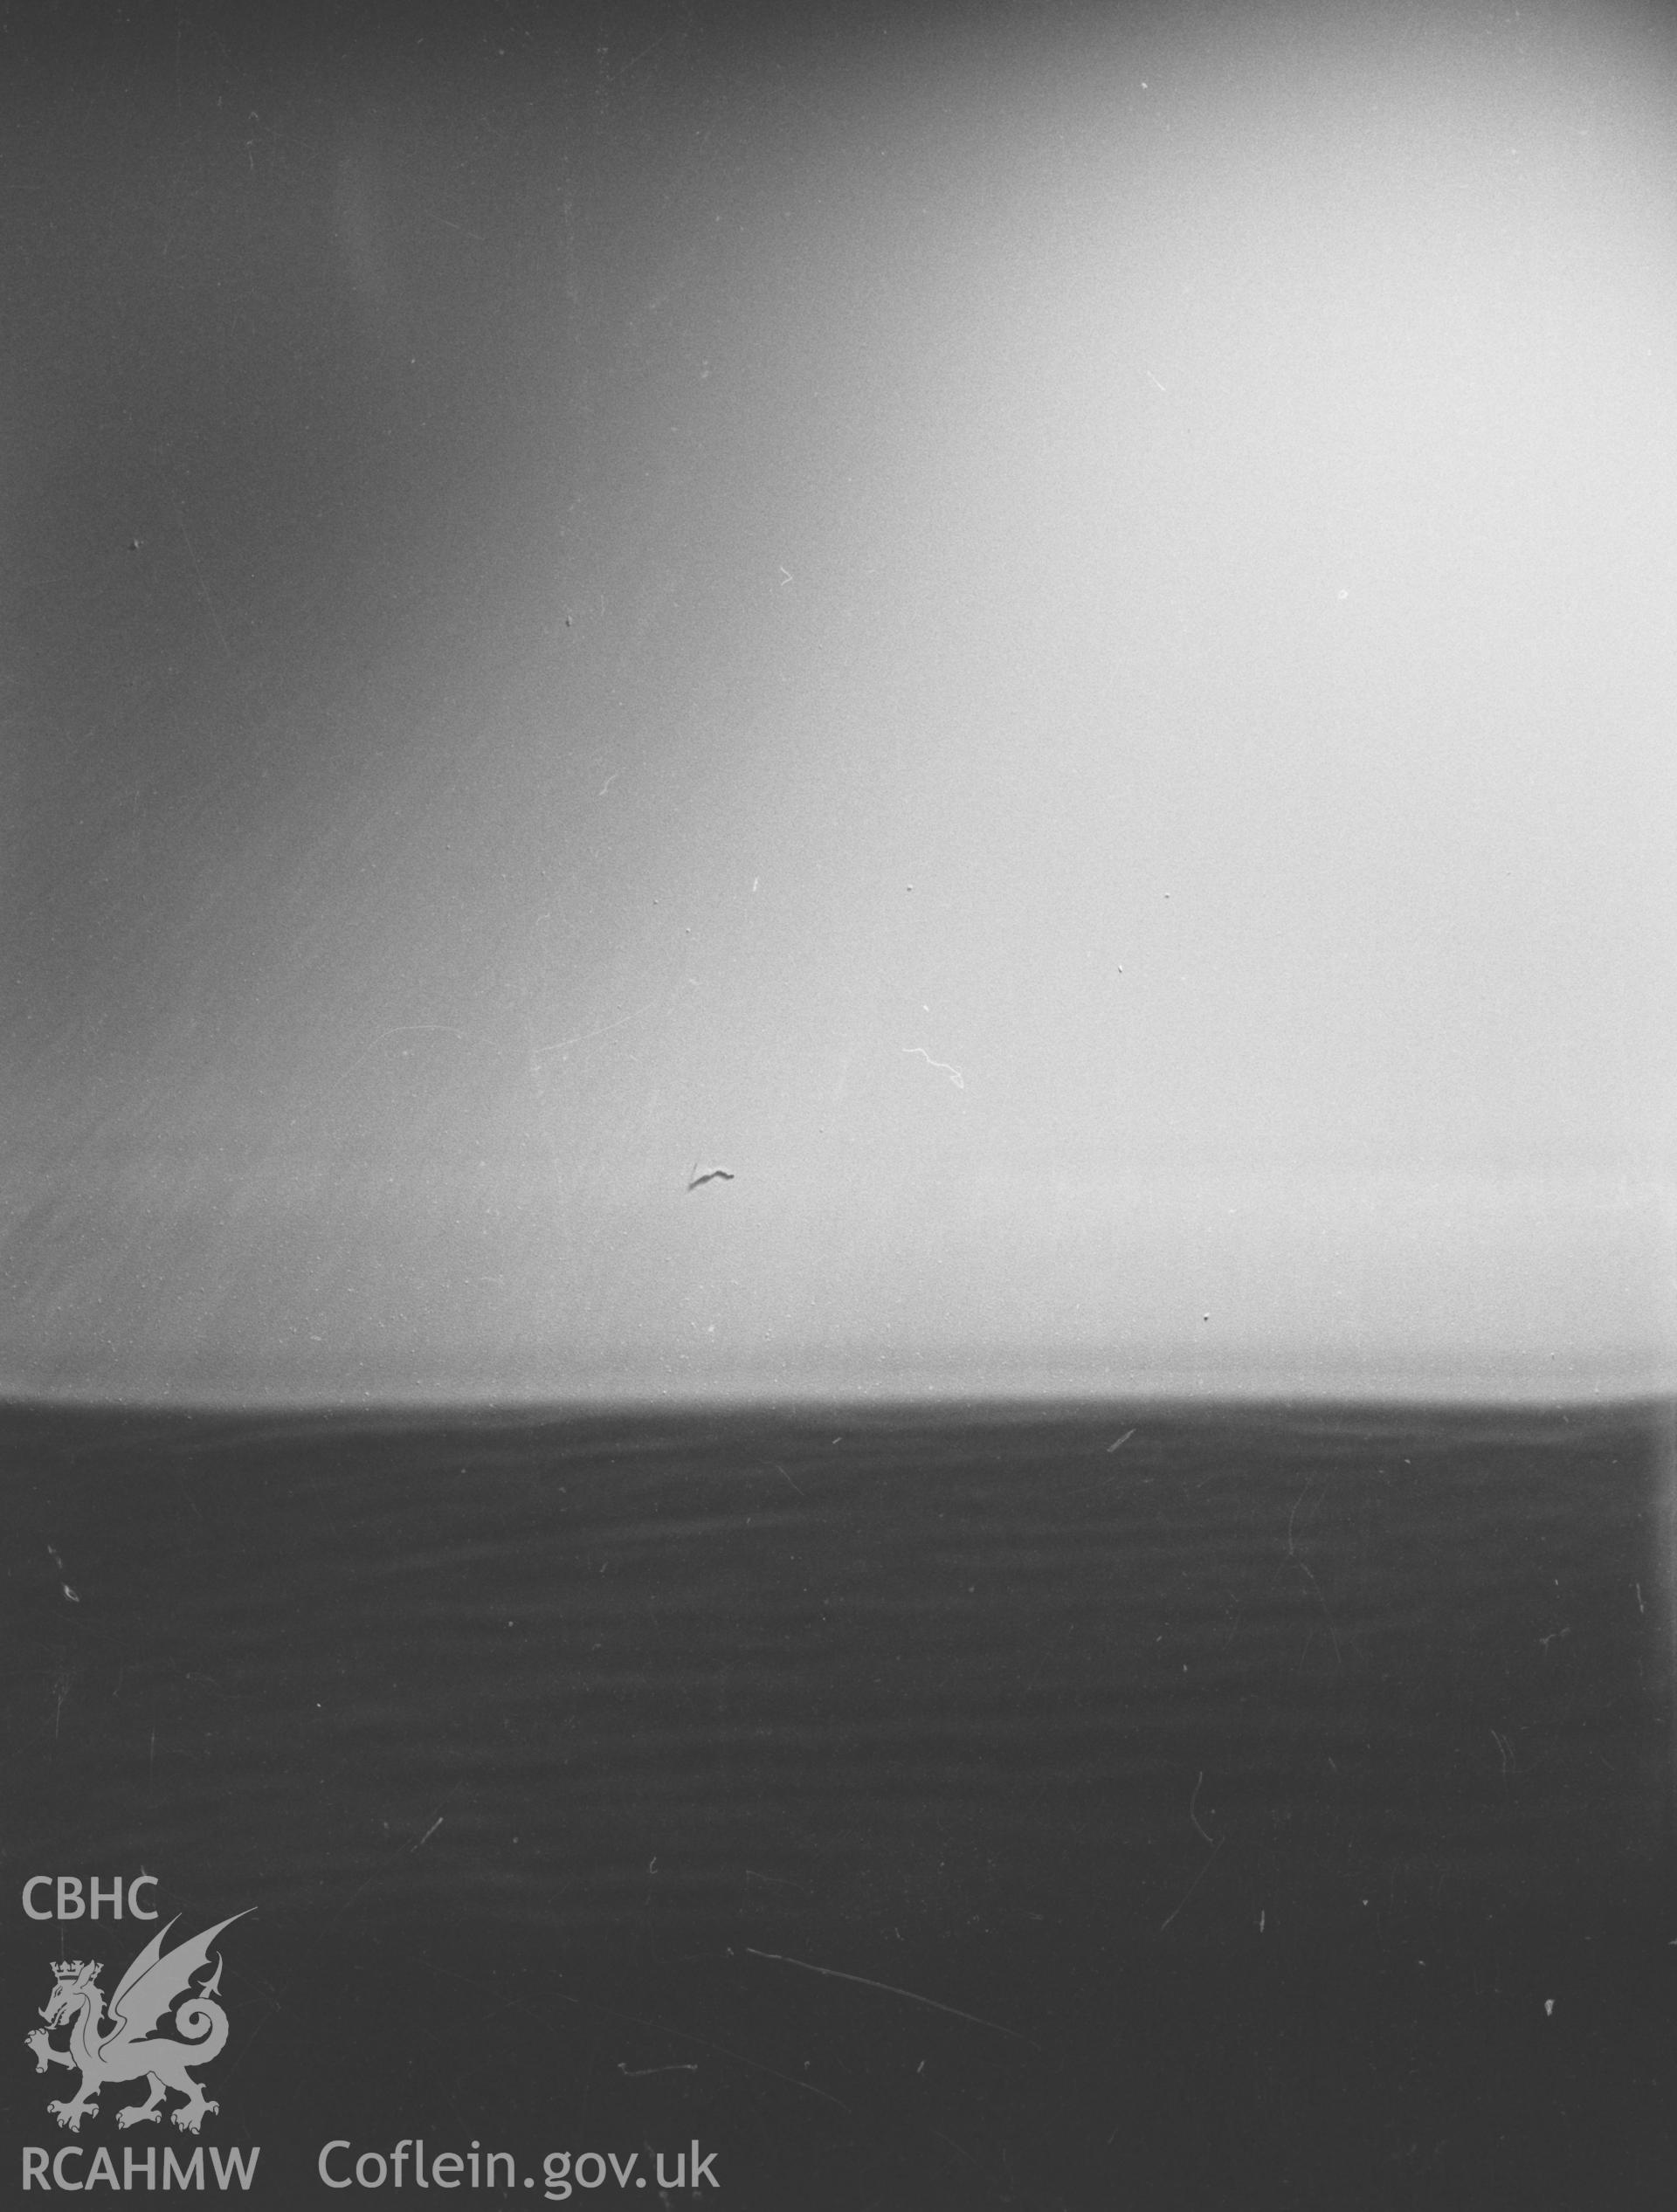 Digital copy of a black and white negative showing sea mist at Tanybwlch, Aberystwyth. Photographed by Arthur O. Chater in April 1968.